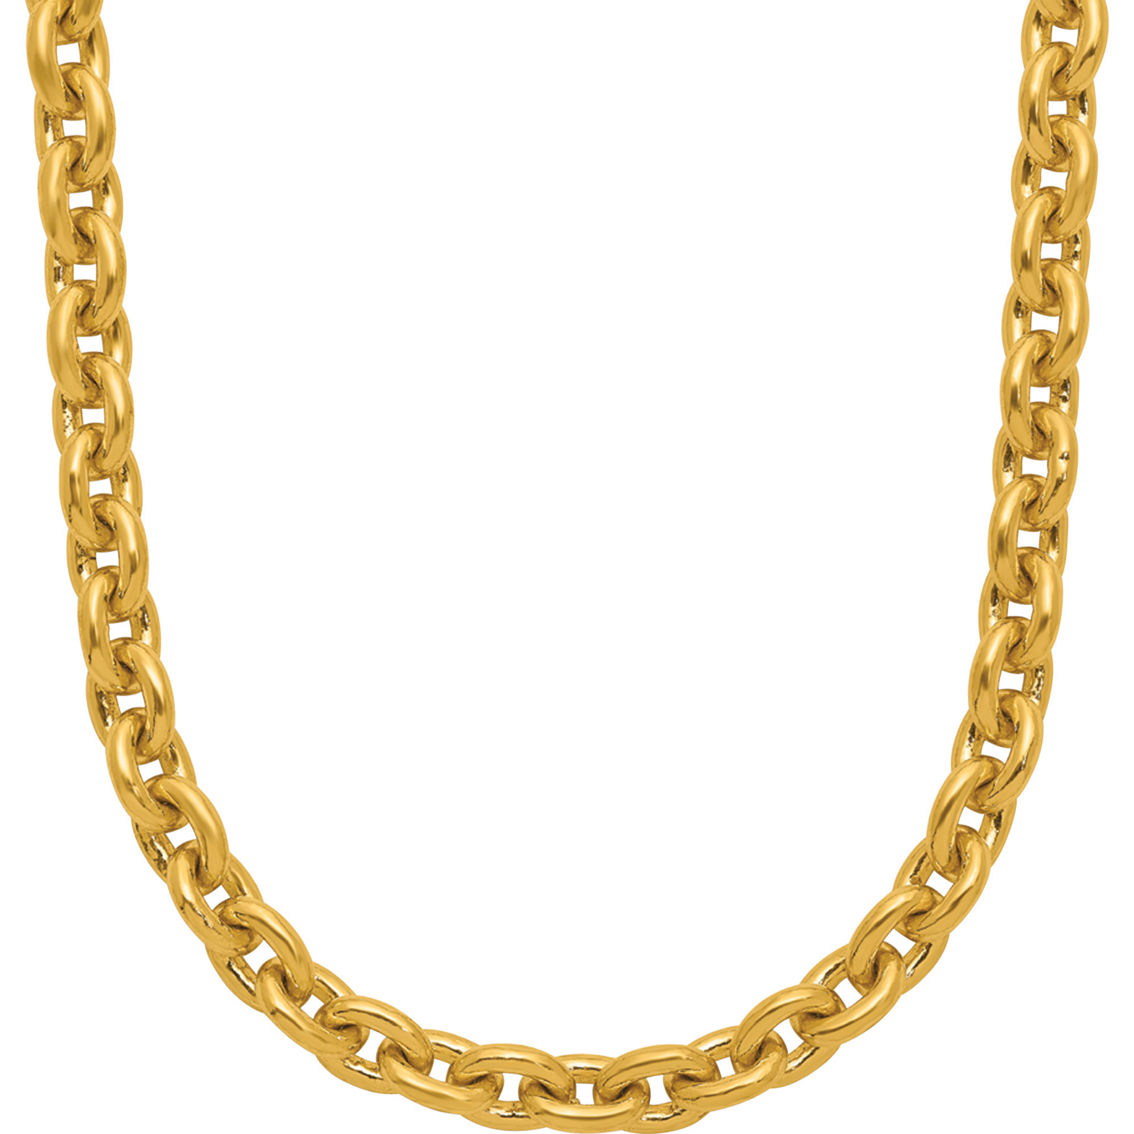 24k Pure Gold 24k Yellow Gold 5.4mm Solid Open Oval Link 20 In. Chain ...